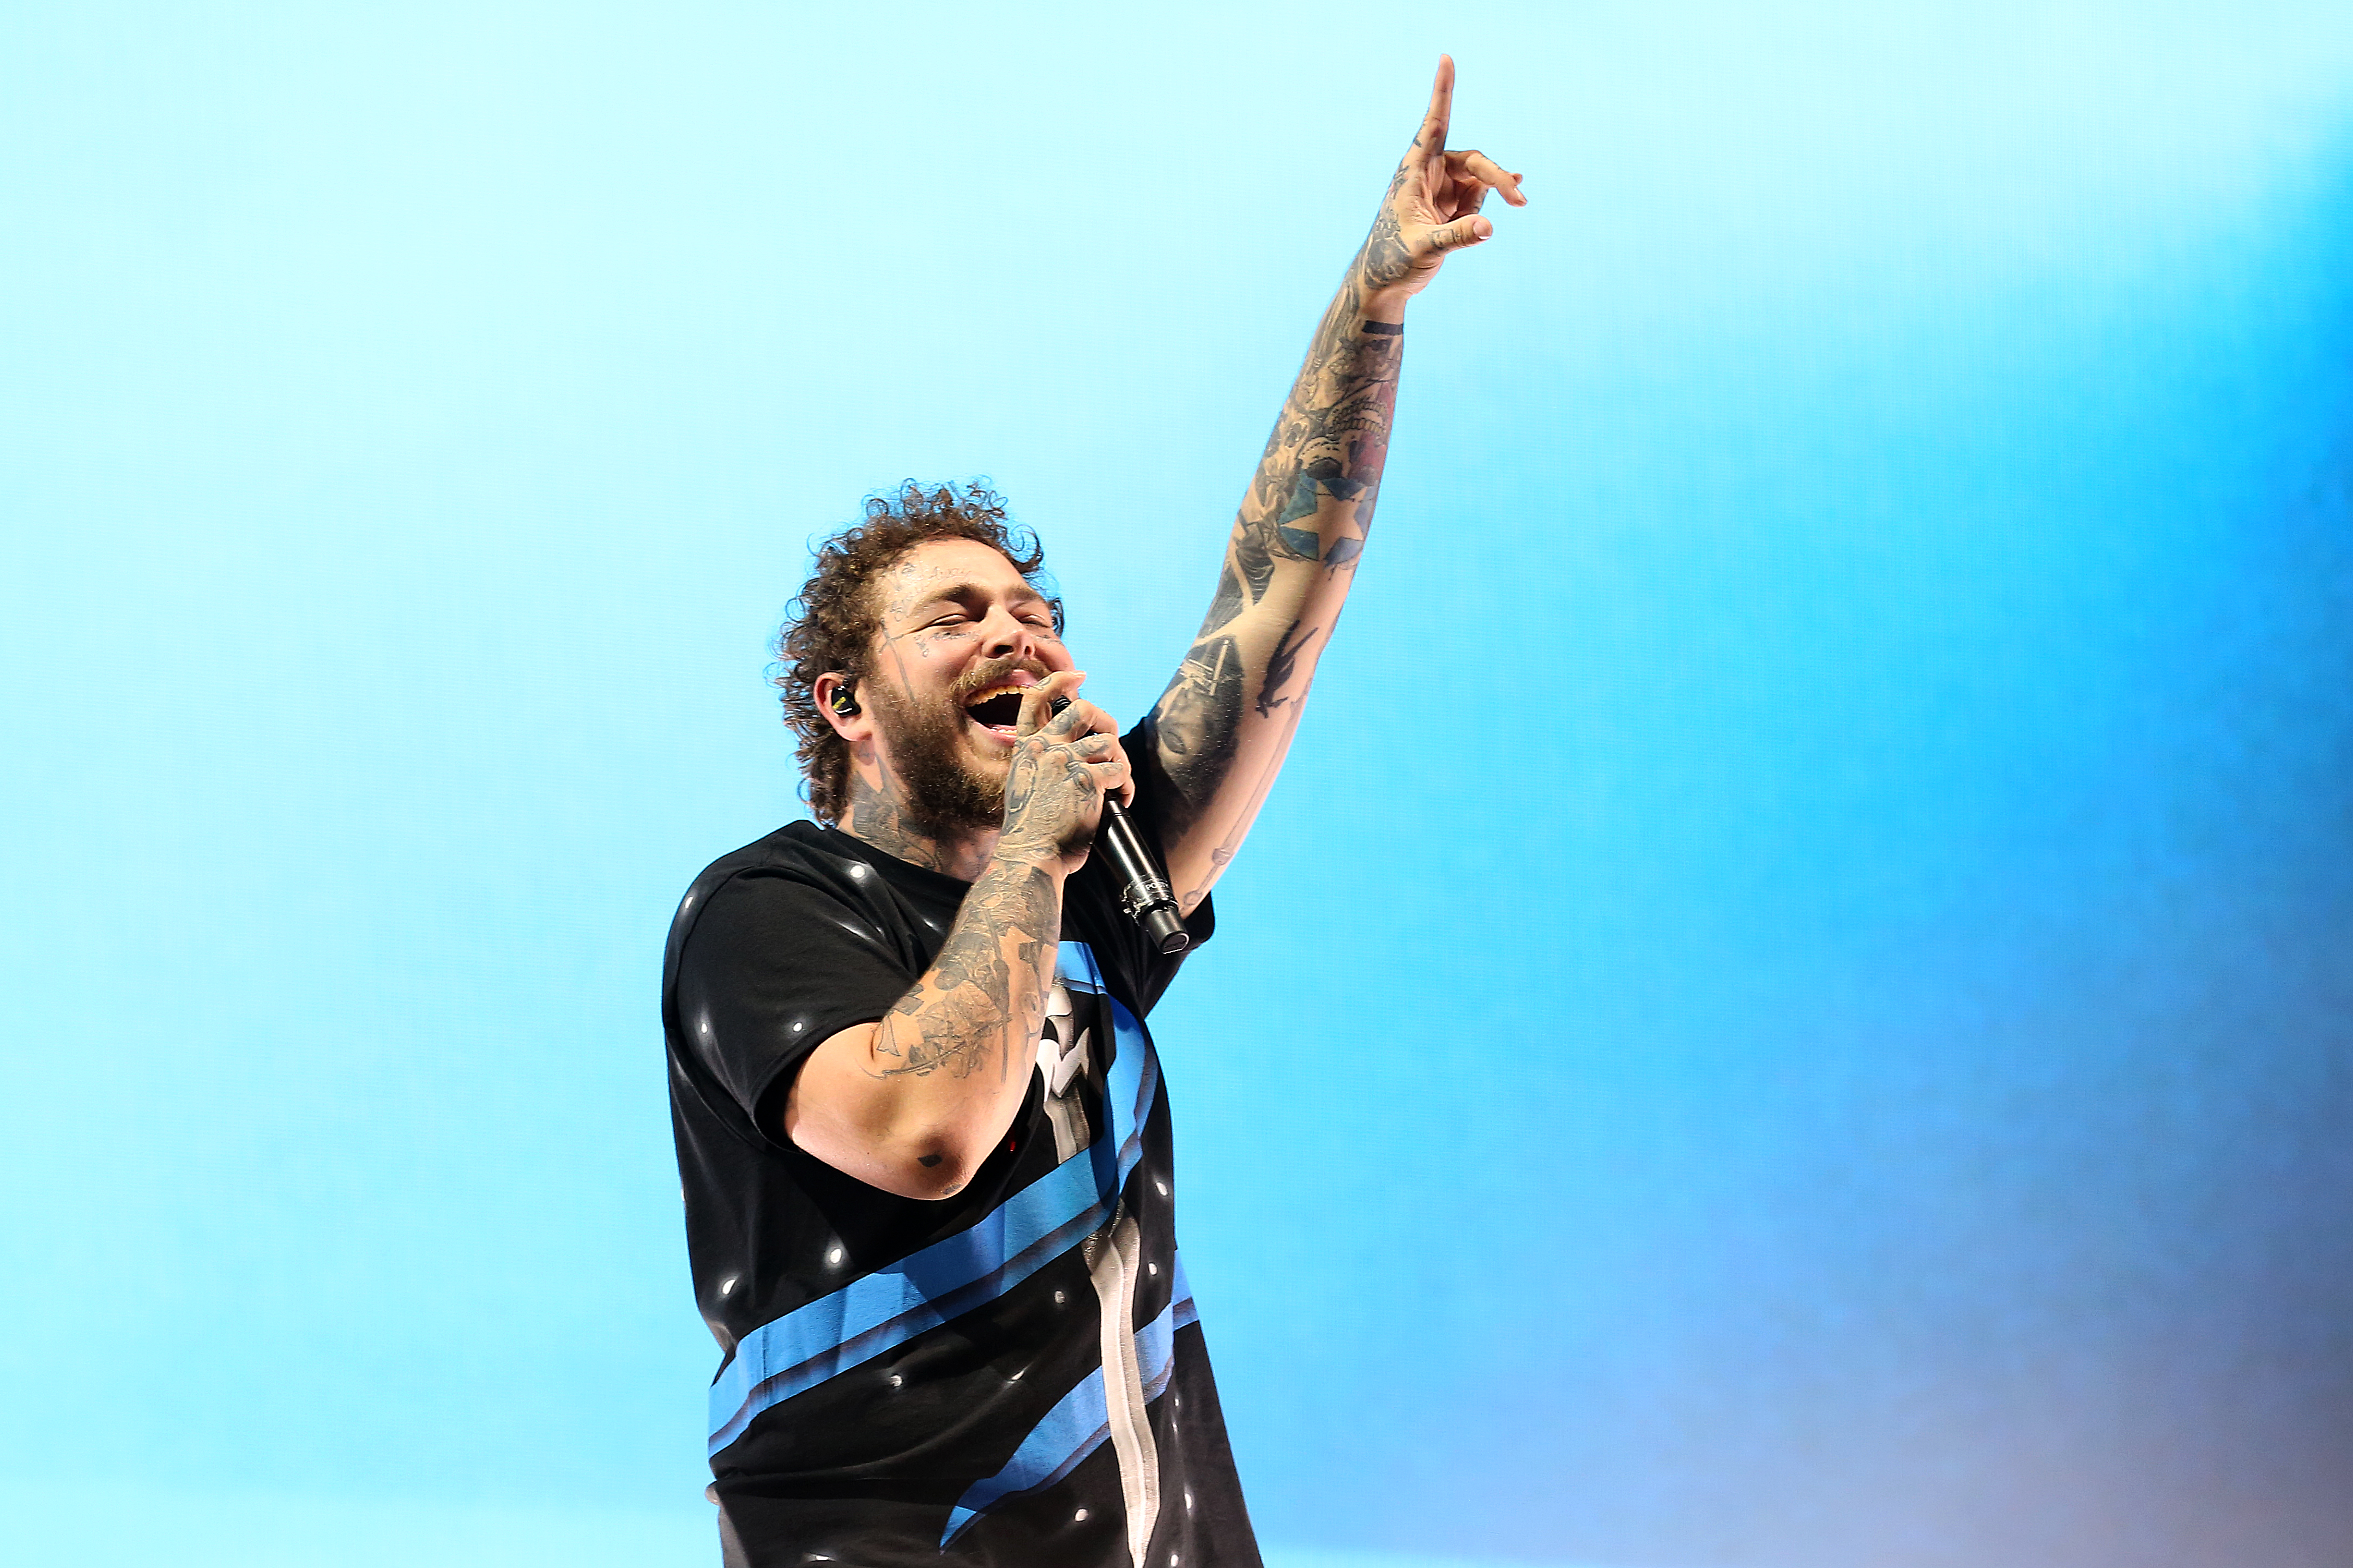 Post Malone’s “Hollywood’s Bleeding:” 5 Things We Want